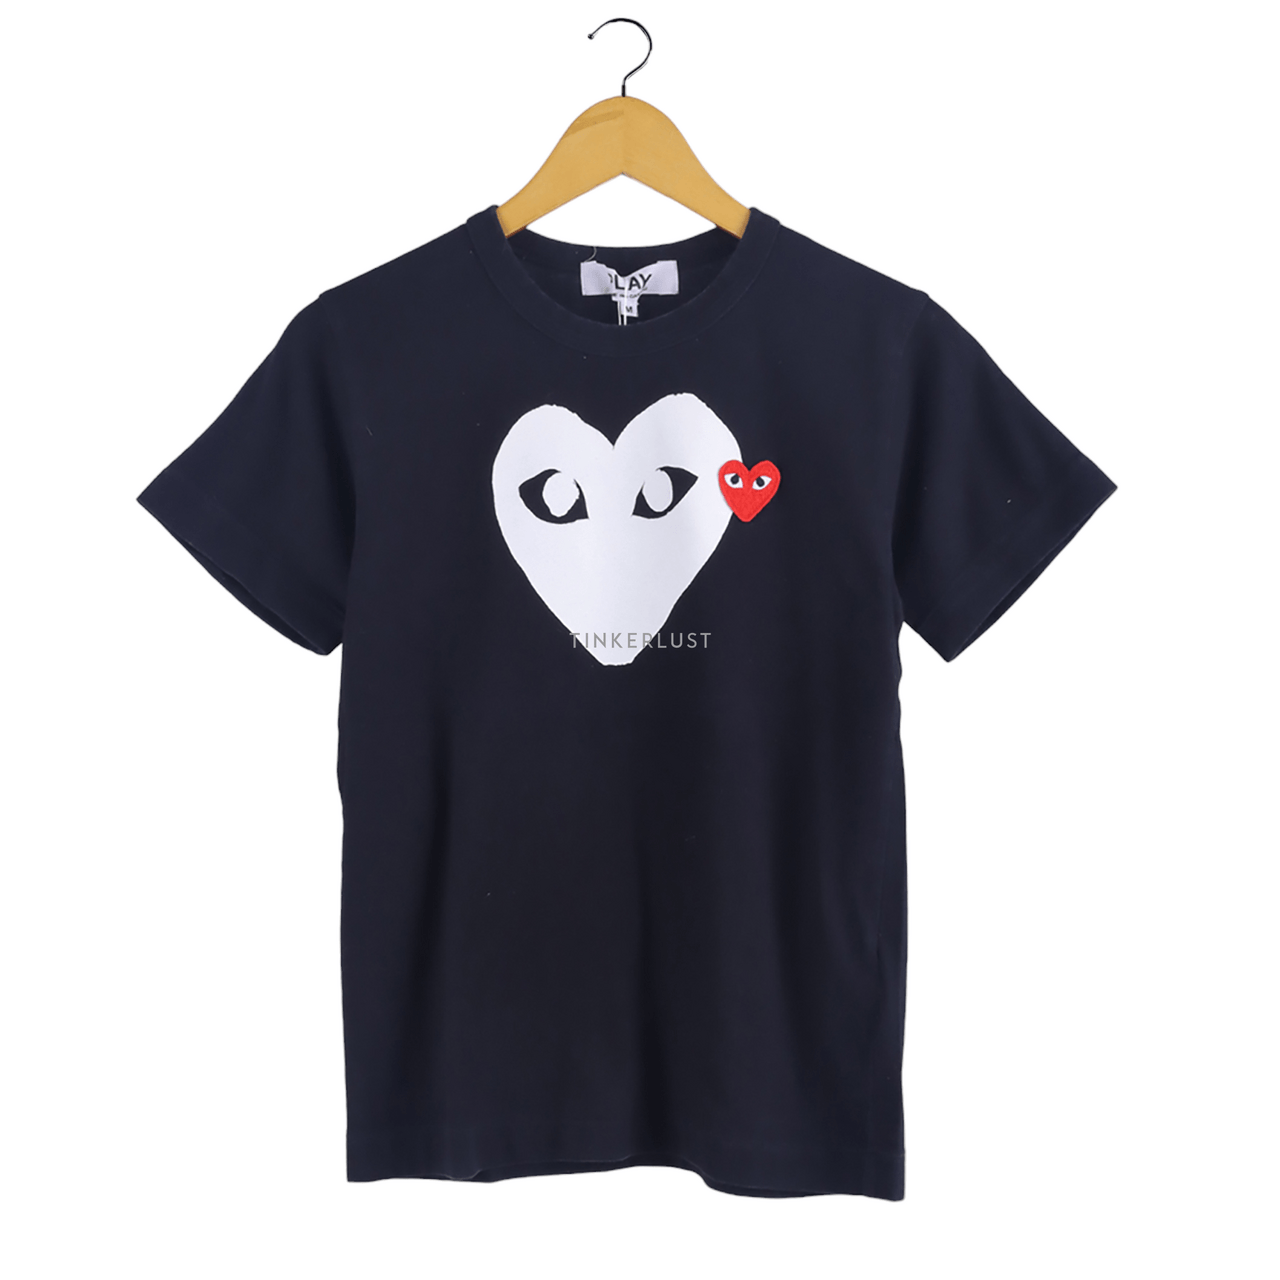 Play by Comme des Garcons Black Heart Print T-Shirt